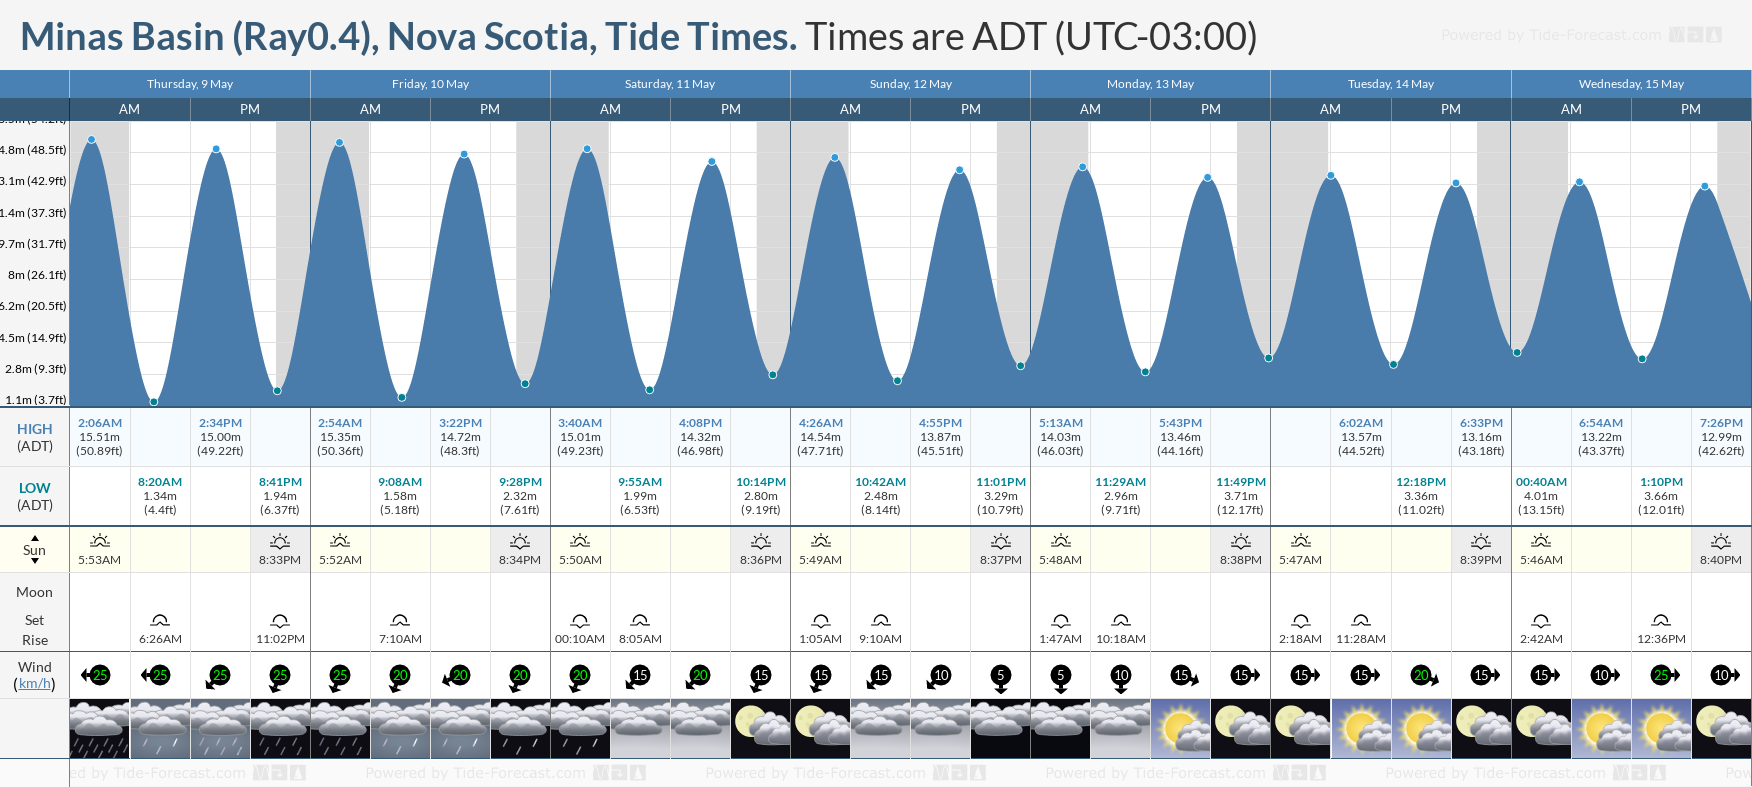 Minas Basin (Ray0.4), Nova Scotia Tide Chart including high and low tide tide times for the next 7 days